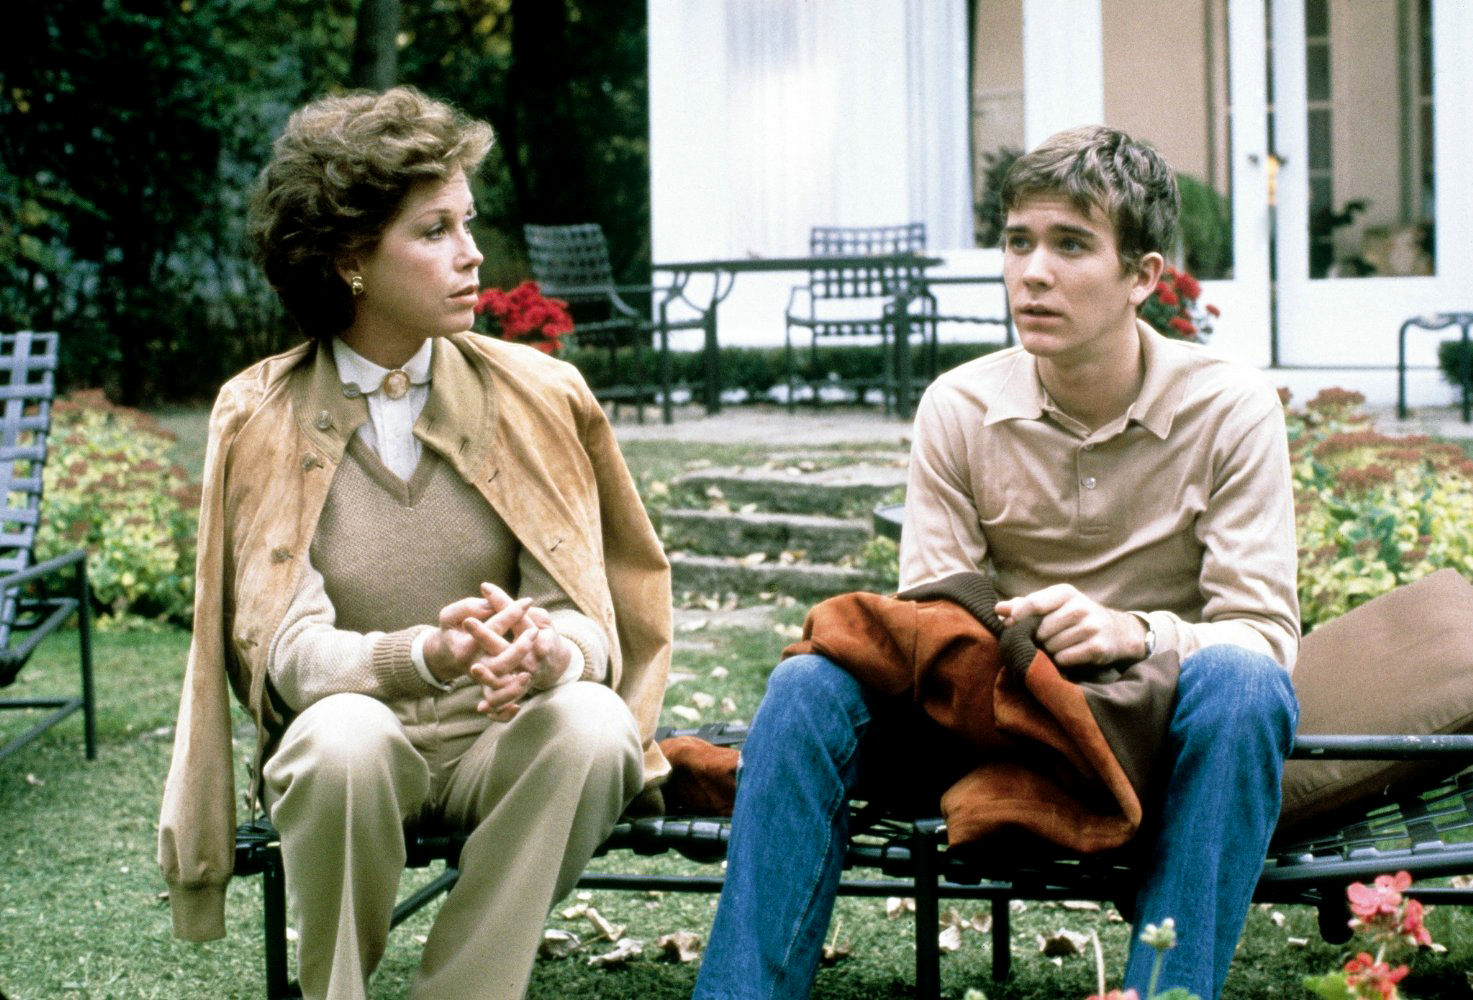 PHOTO: Mary Tyler Moore, as Beth, and Timothy Hutton, as Conrad, in a scene from "Ordinary People."